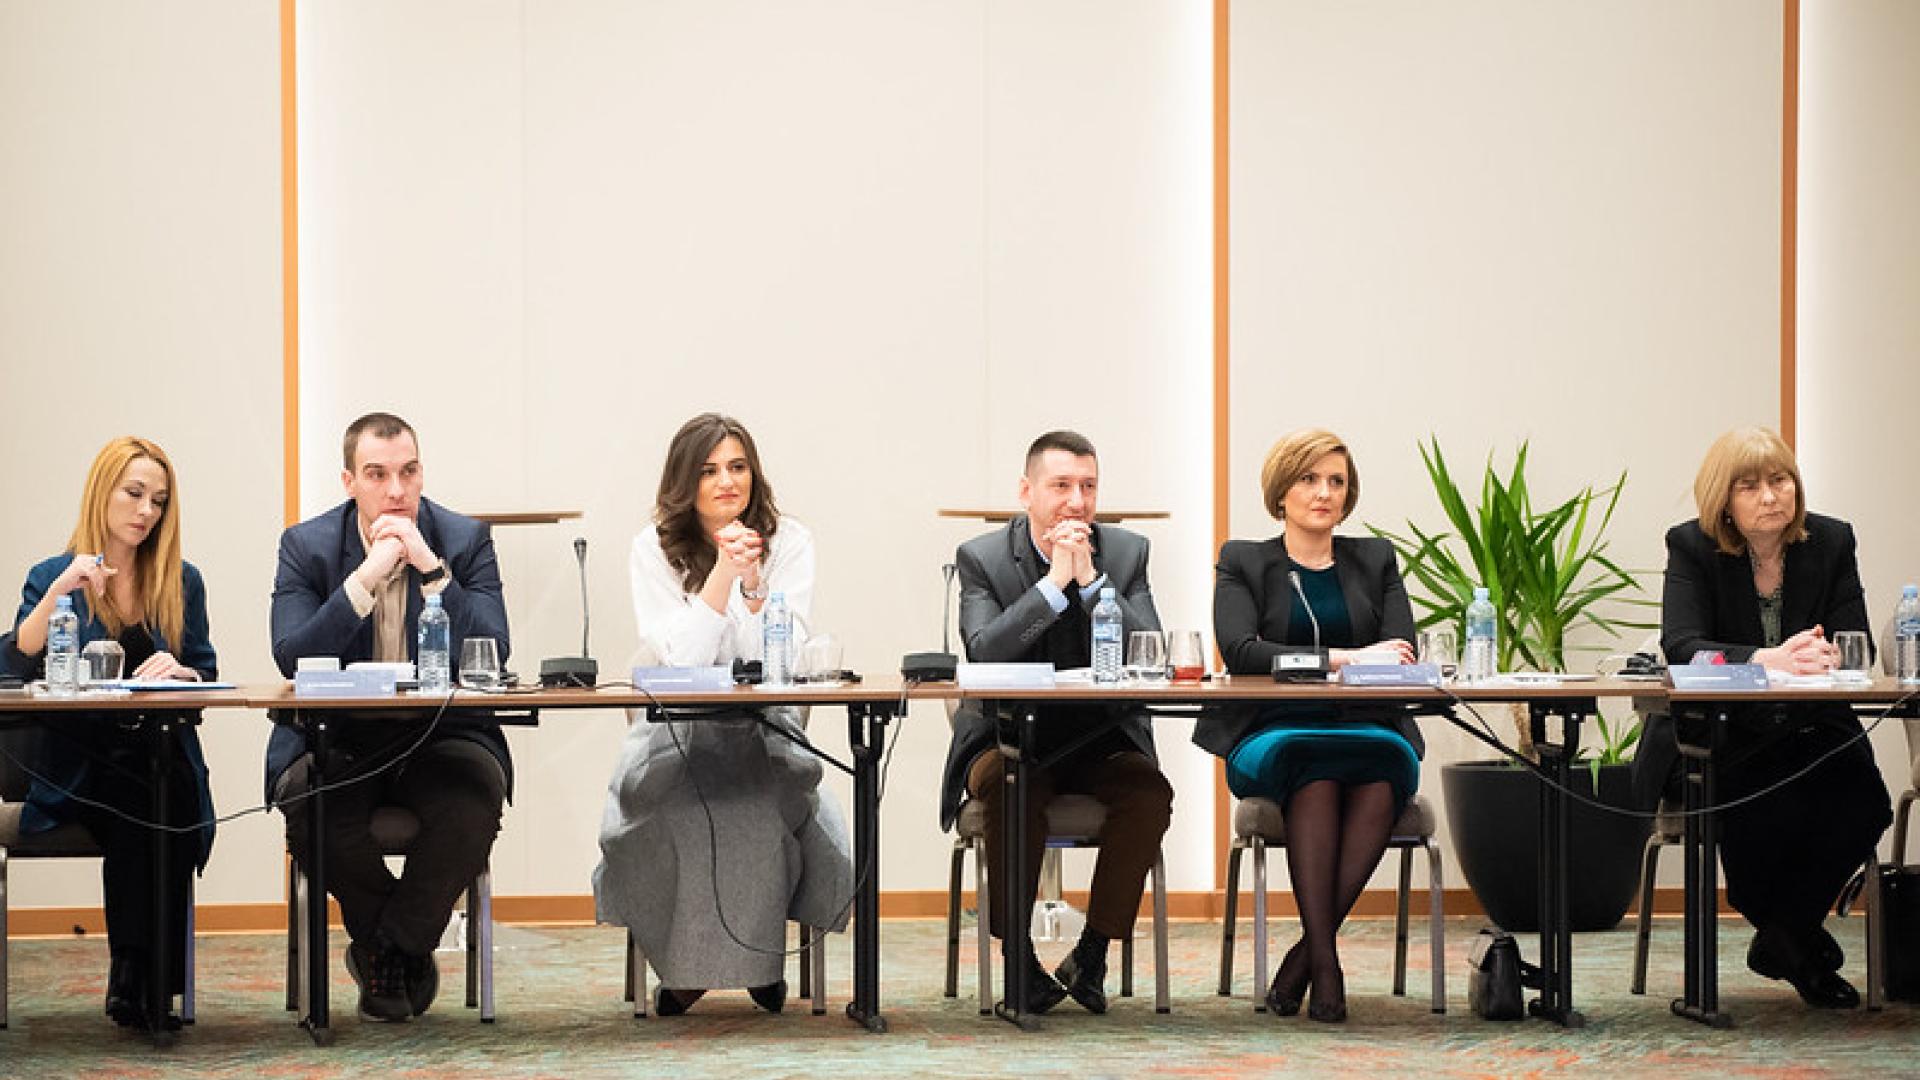 Five people speaking on a panel sit behind a table listening attentively